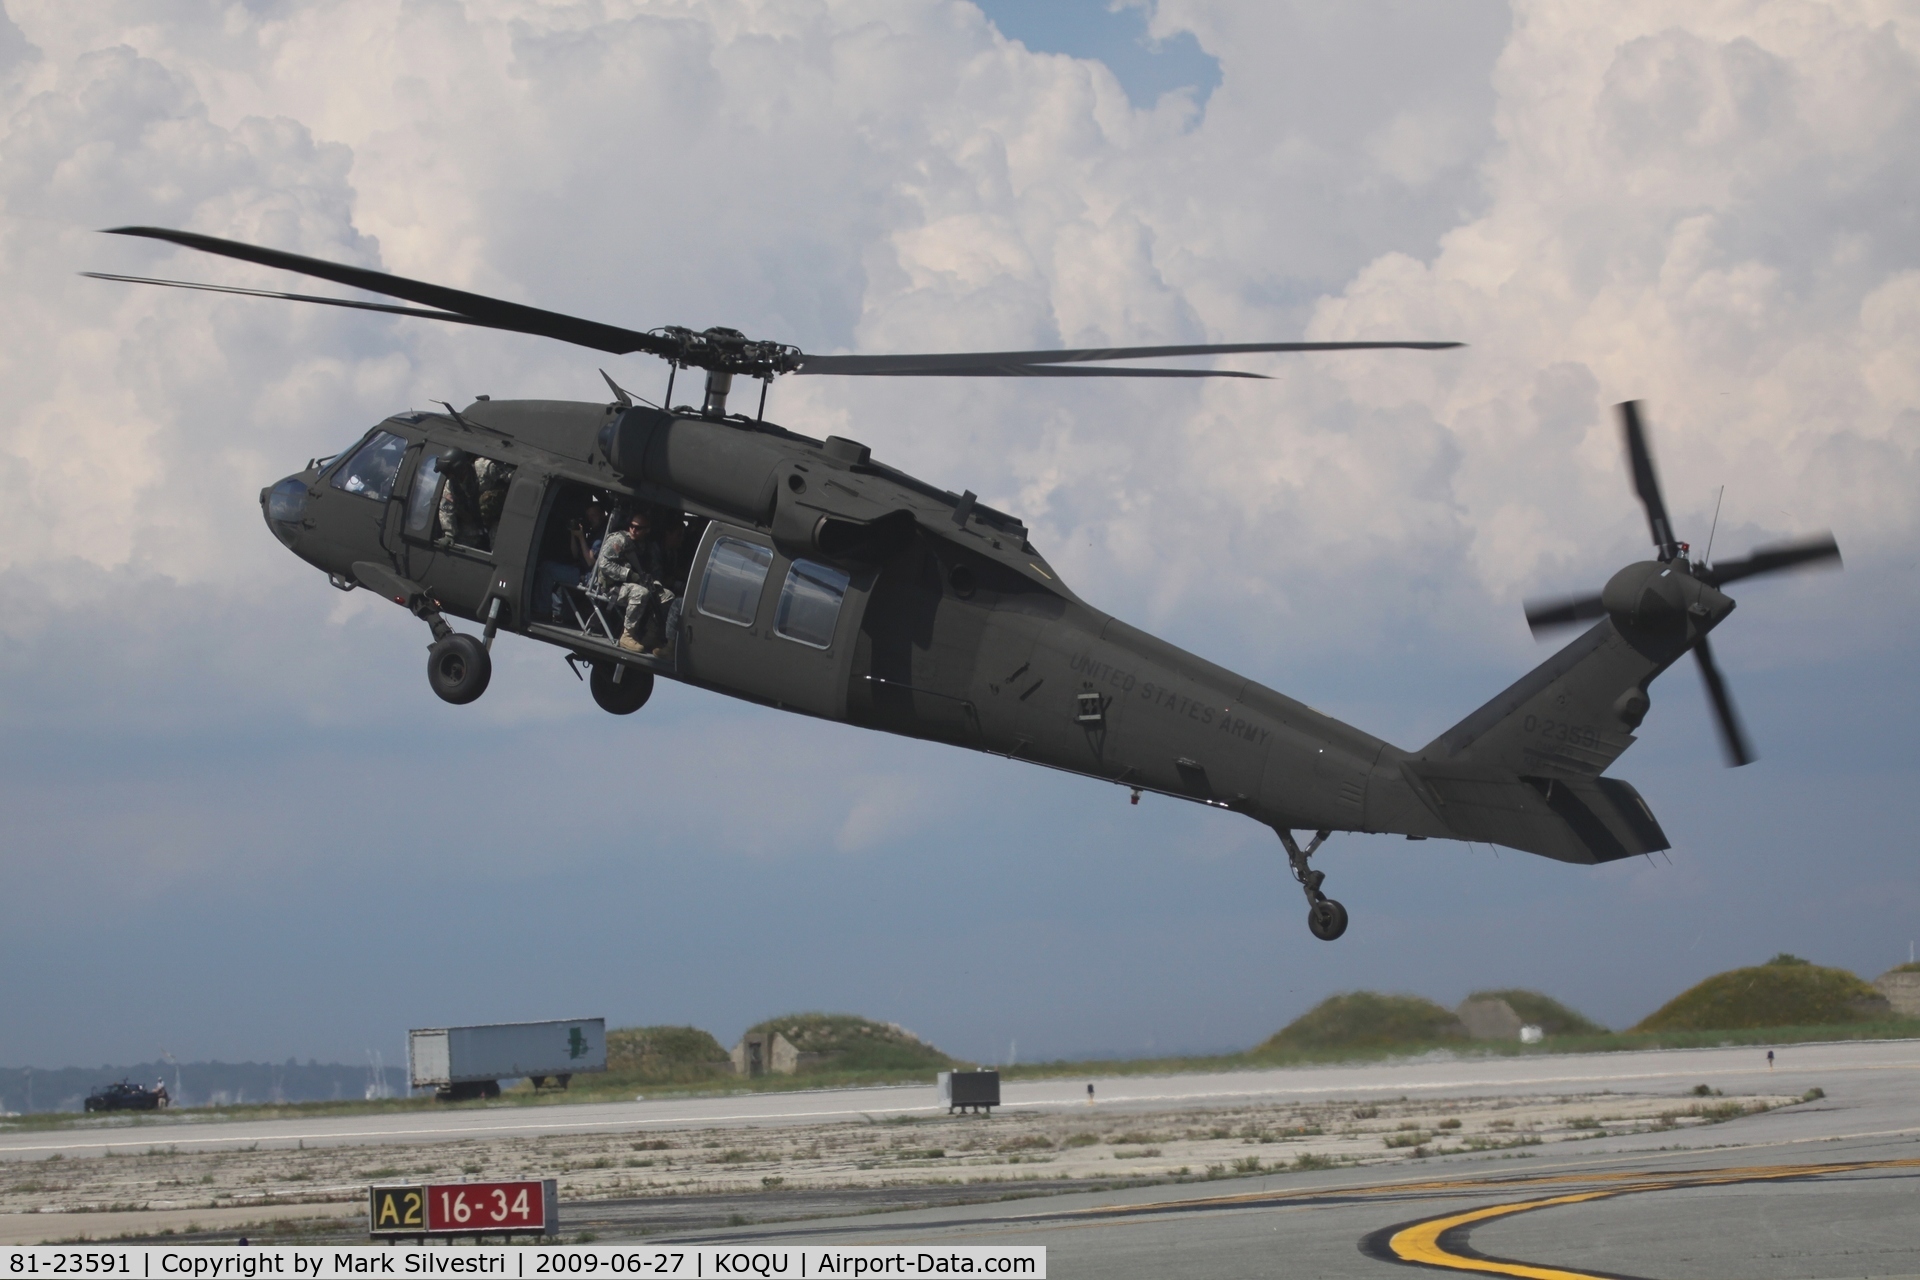 81-23591, 1981 Sikorsky UH-60A Black Hawk C/N 70-312, Quonset Point, RI 2009